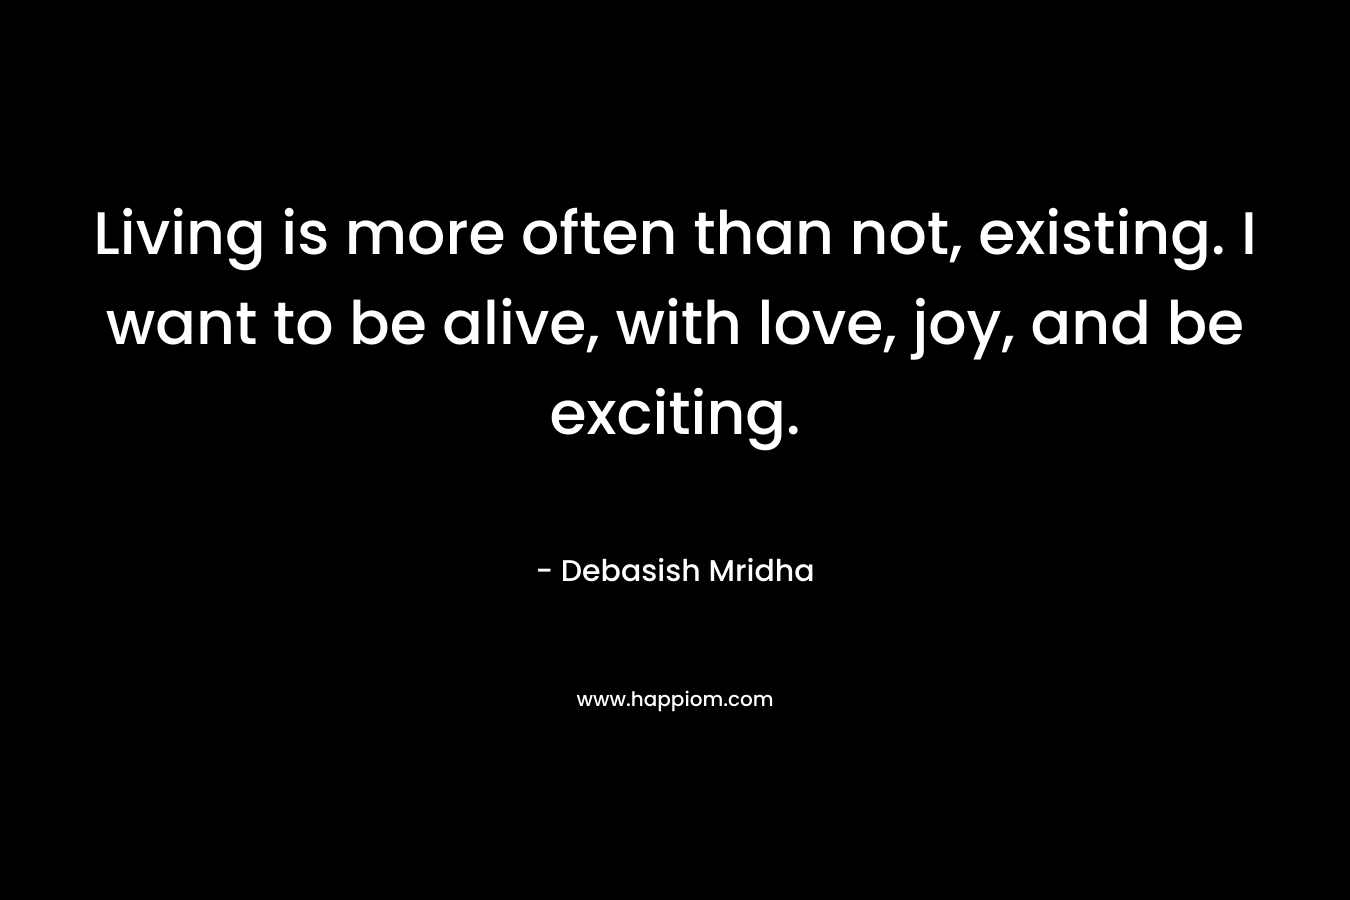 Living is more often than not, existing. I want to be alive, with love, joy, and be exciting.